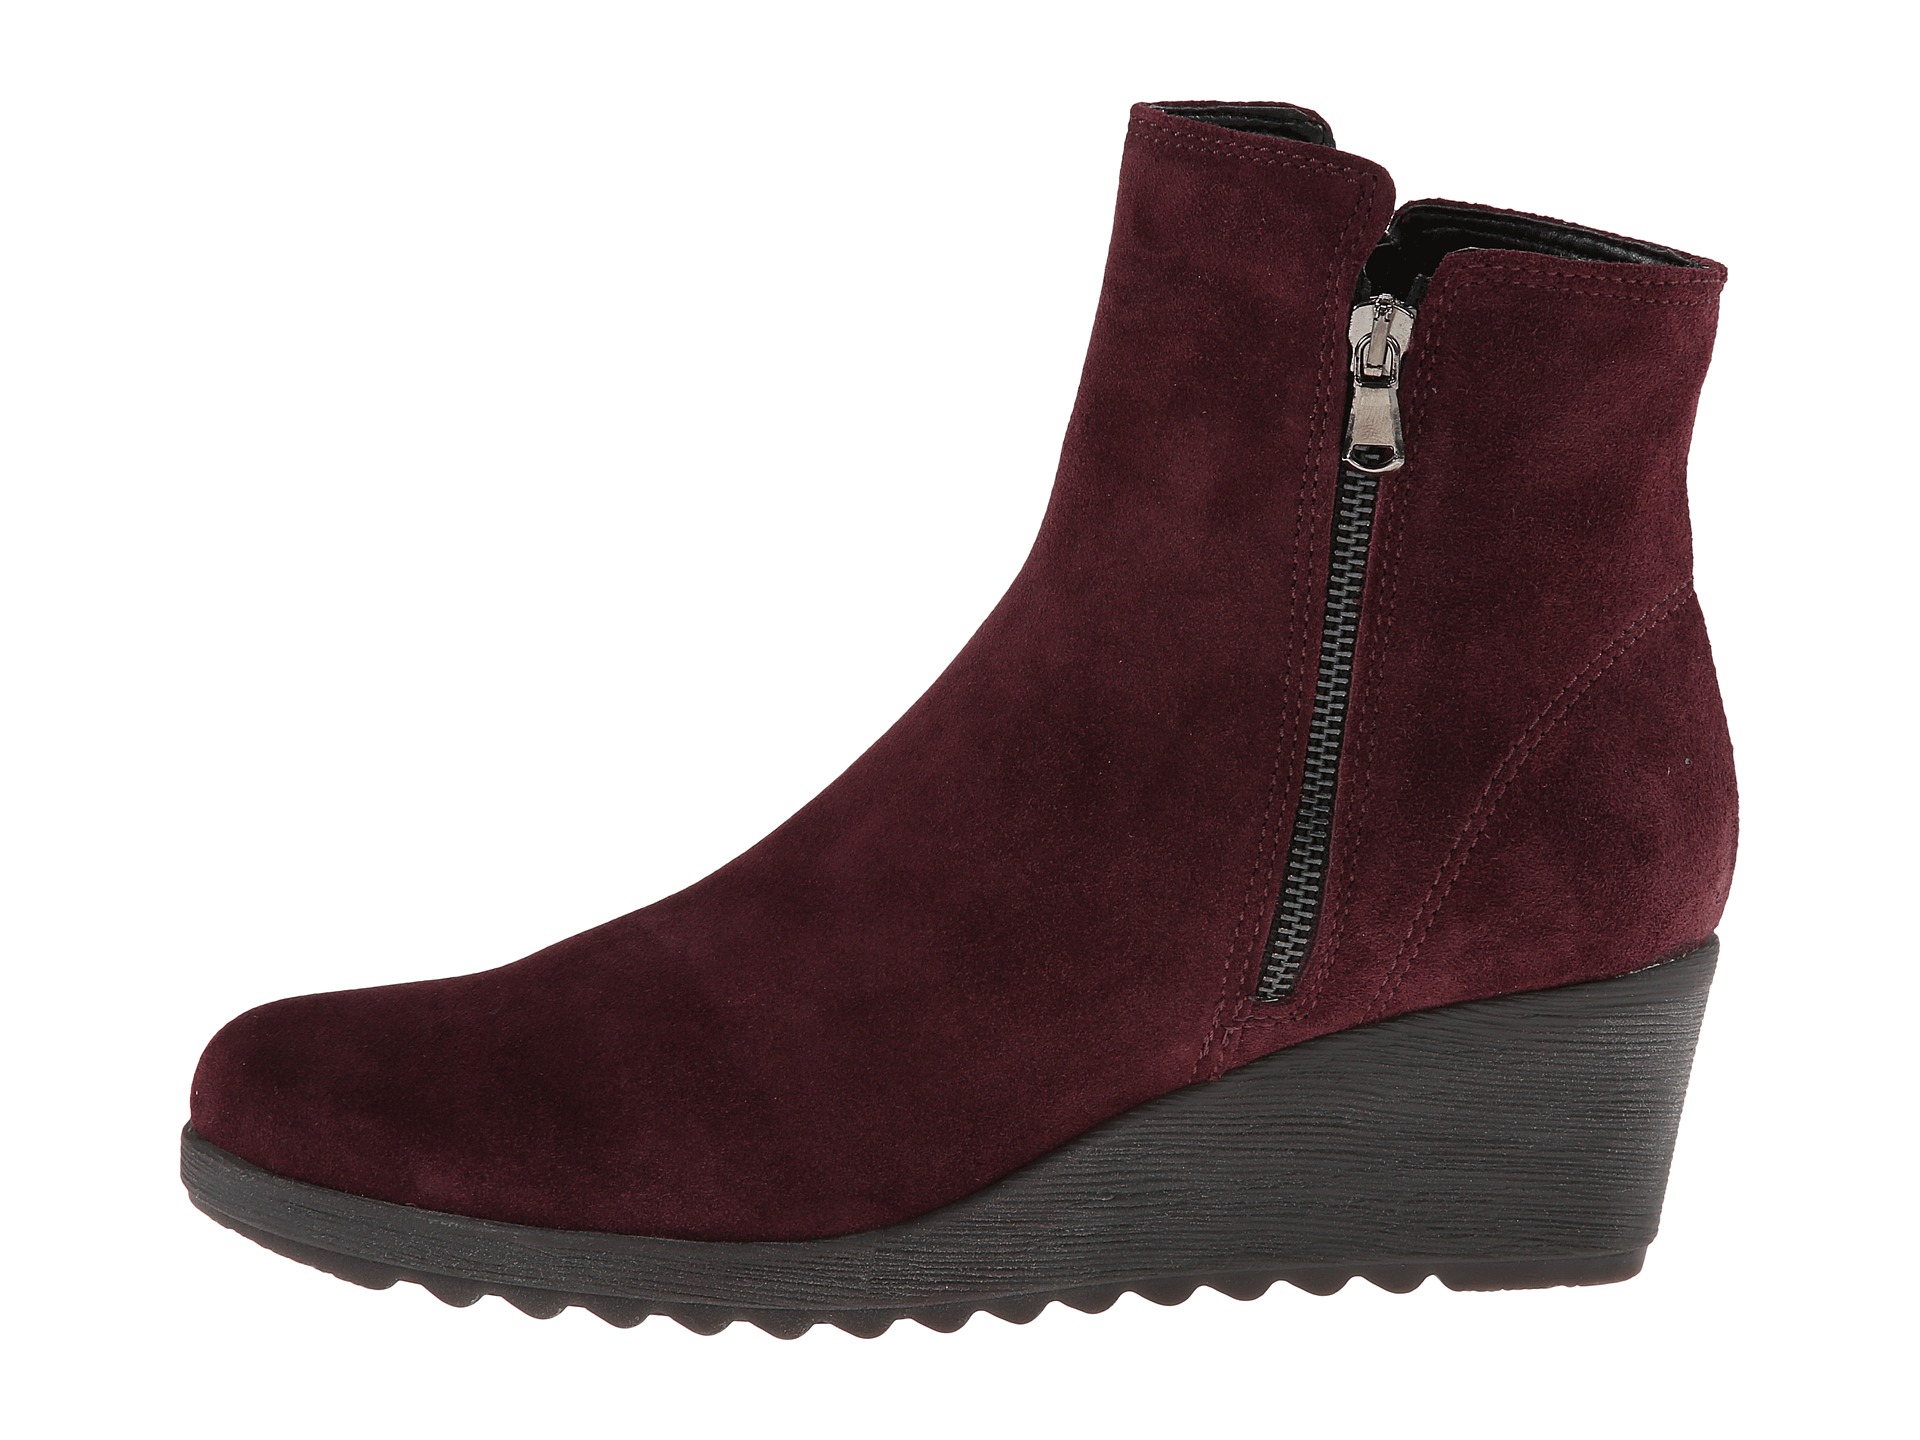 The Flexx Pic A Winner Gloomy Suede | Shipped Free at Zappos